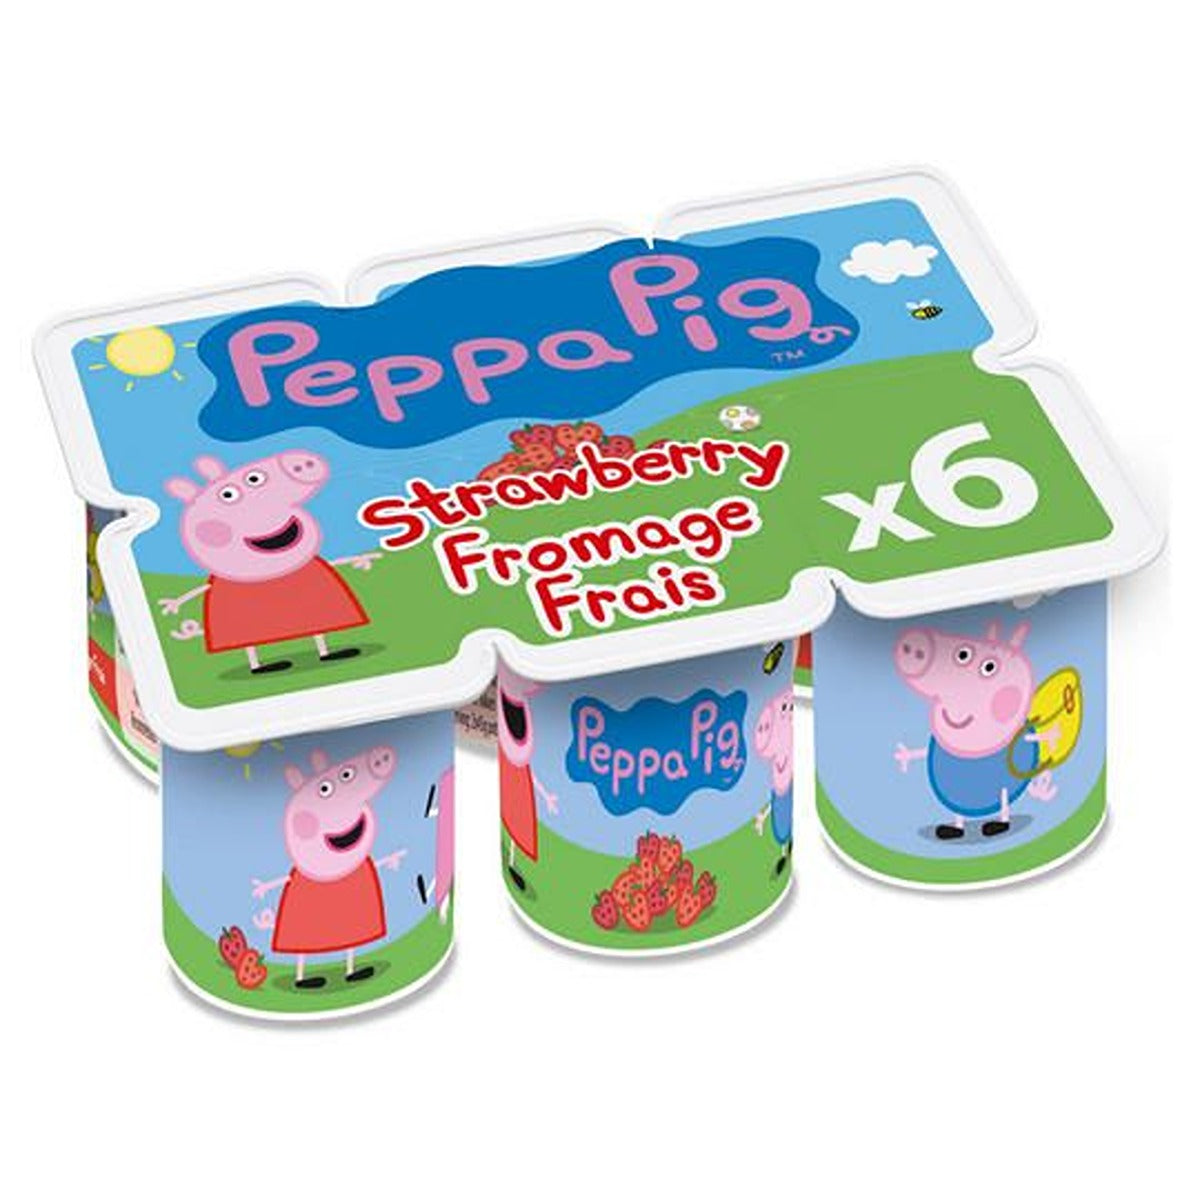 Peppa Pig - Strawberry Fromage Frais - 6 x 45g - Continental Food Store